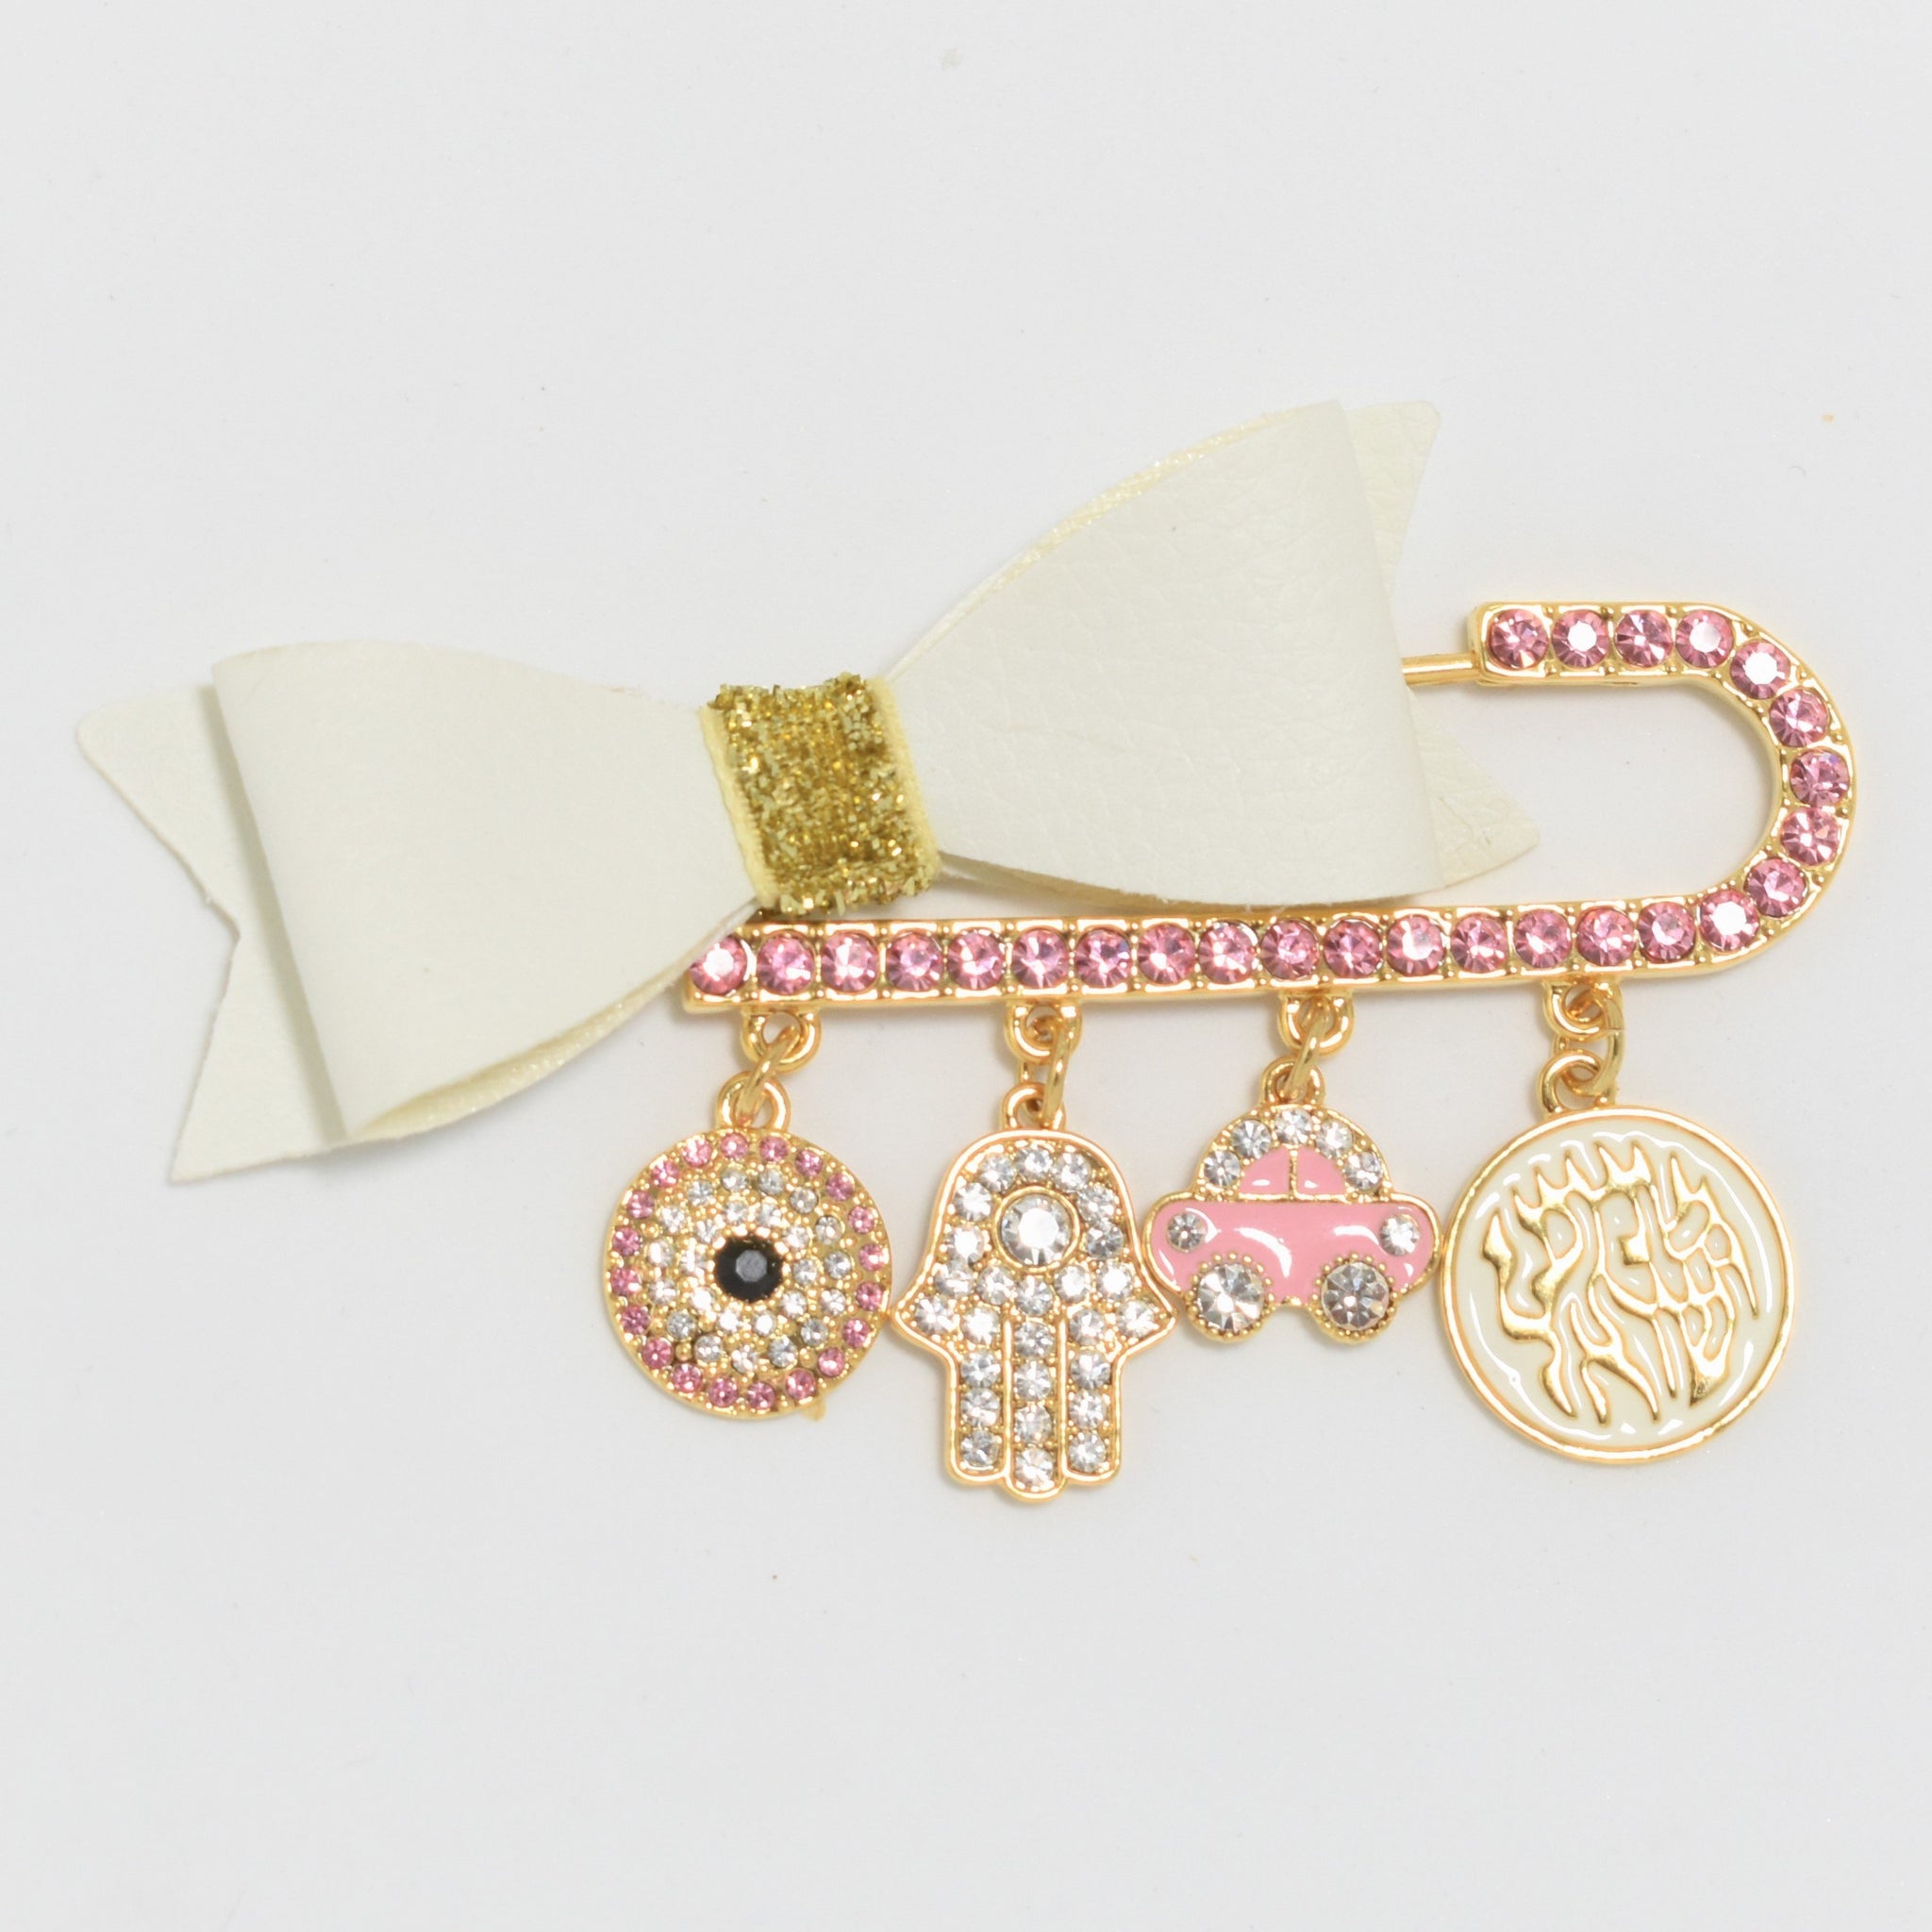 Shema Israel White Bow Pin for girls